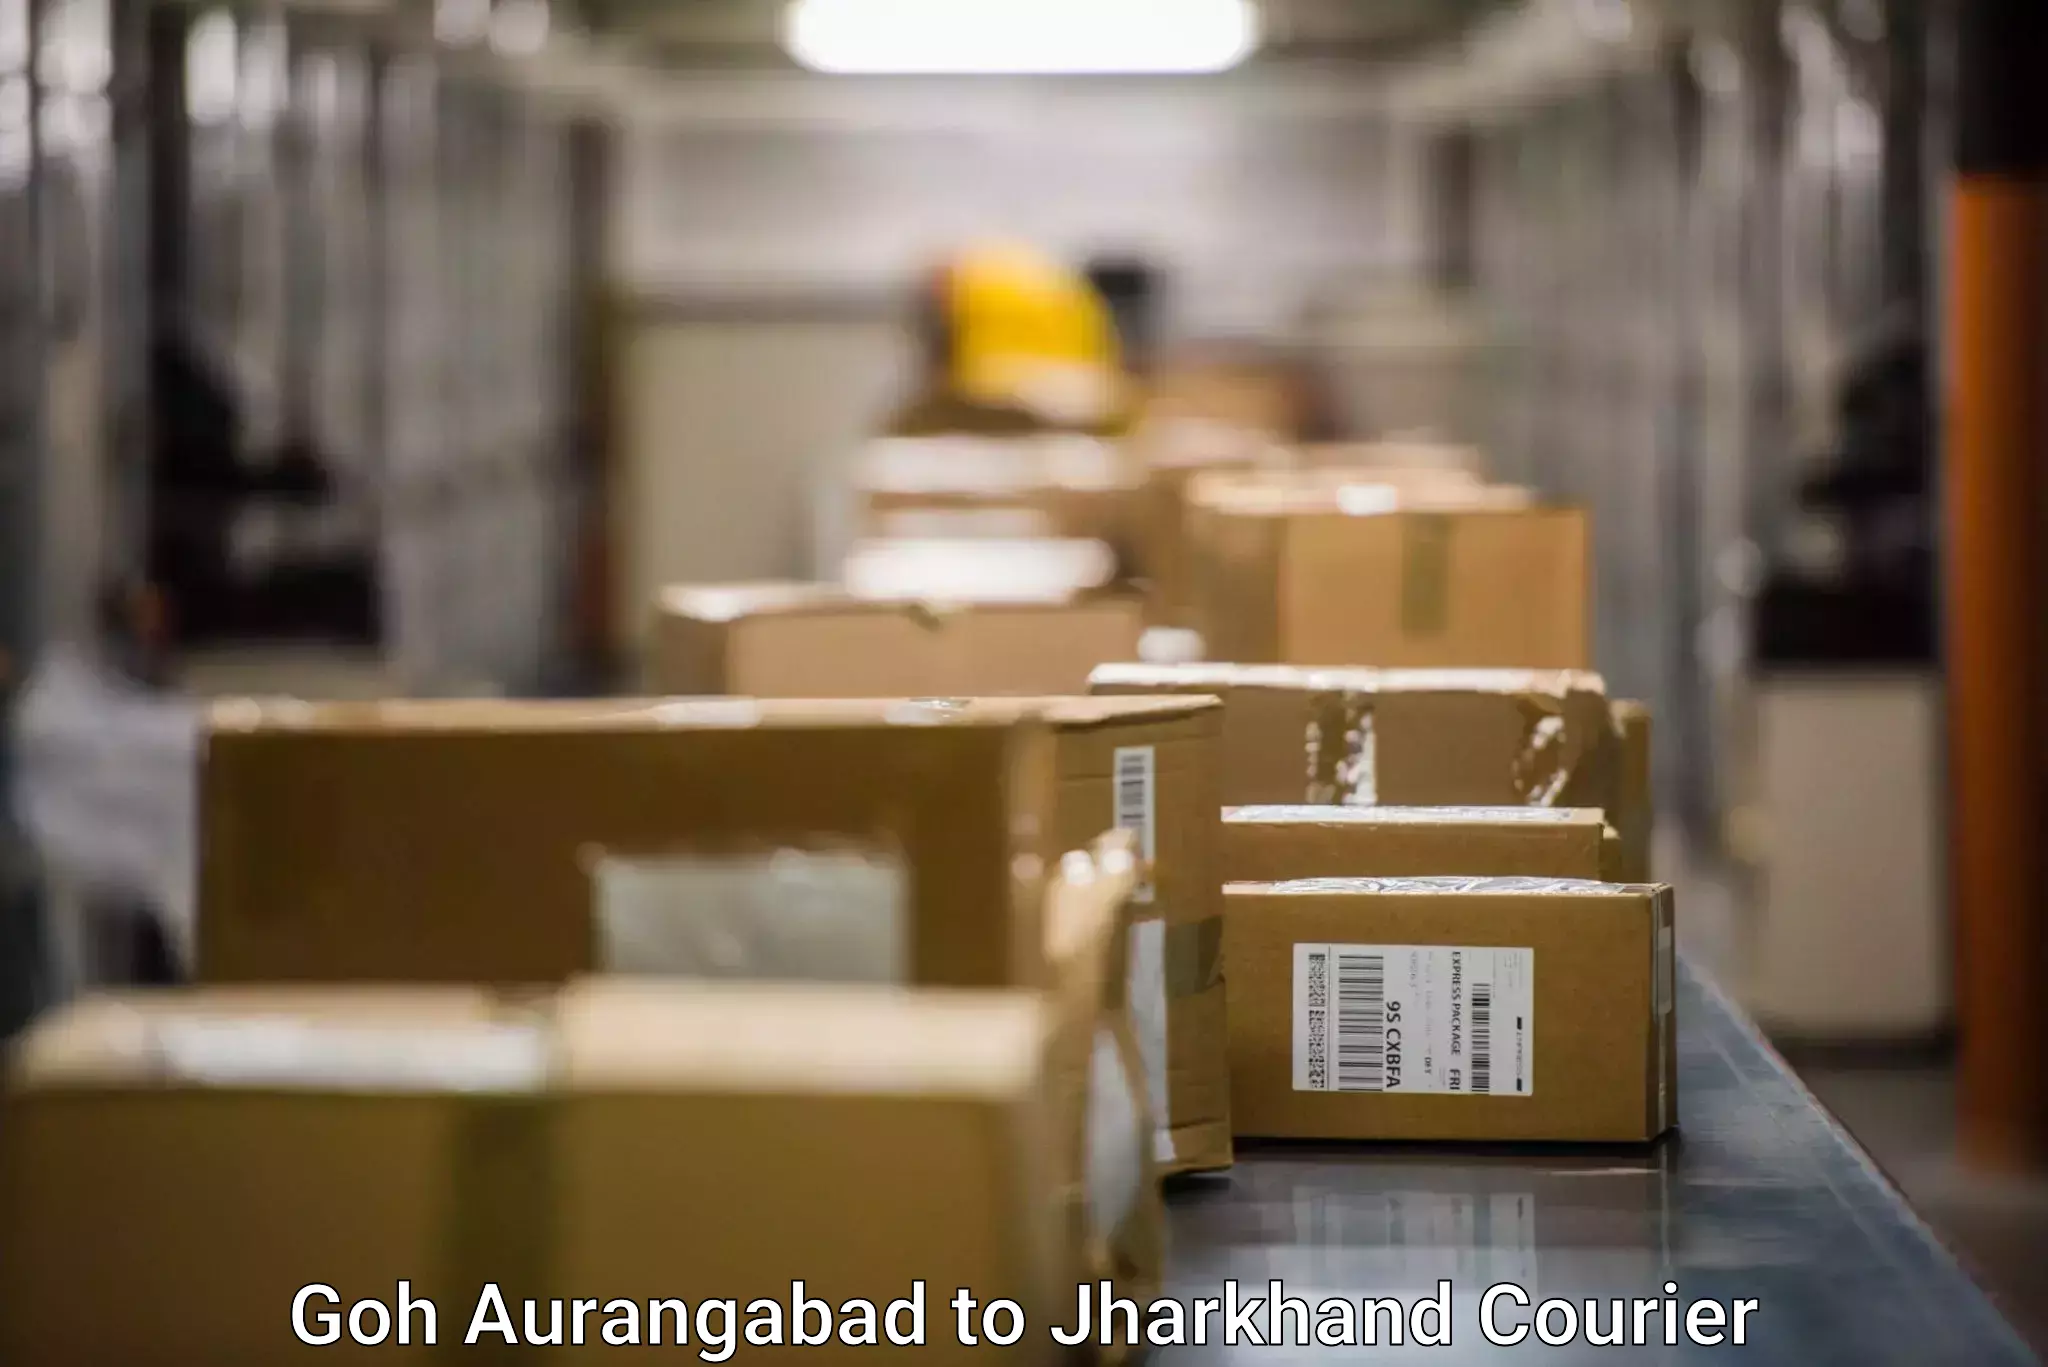 End-to-end delivery in Goh Aurangabad to Jharia